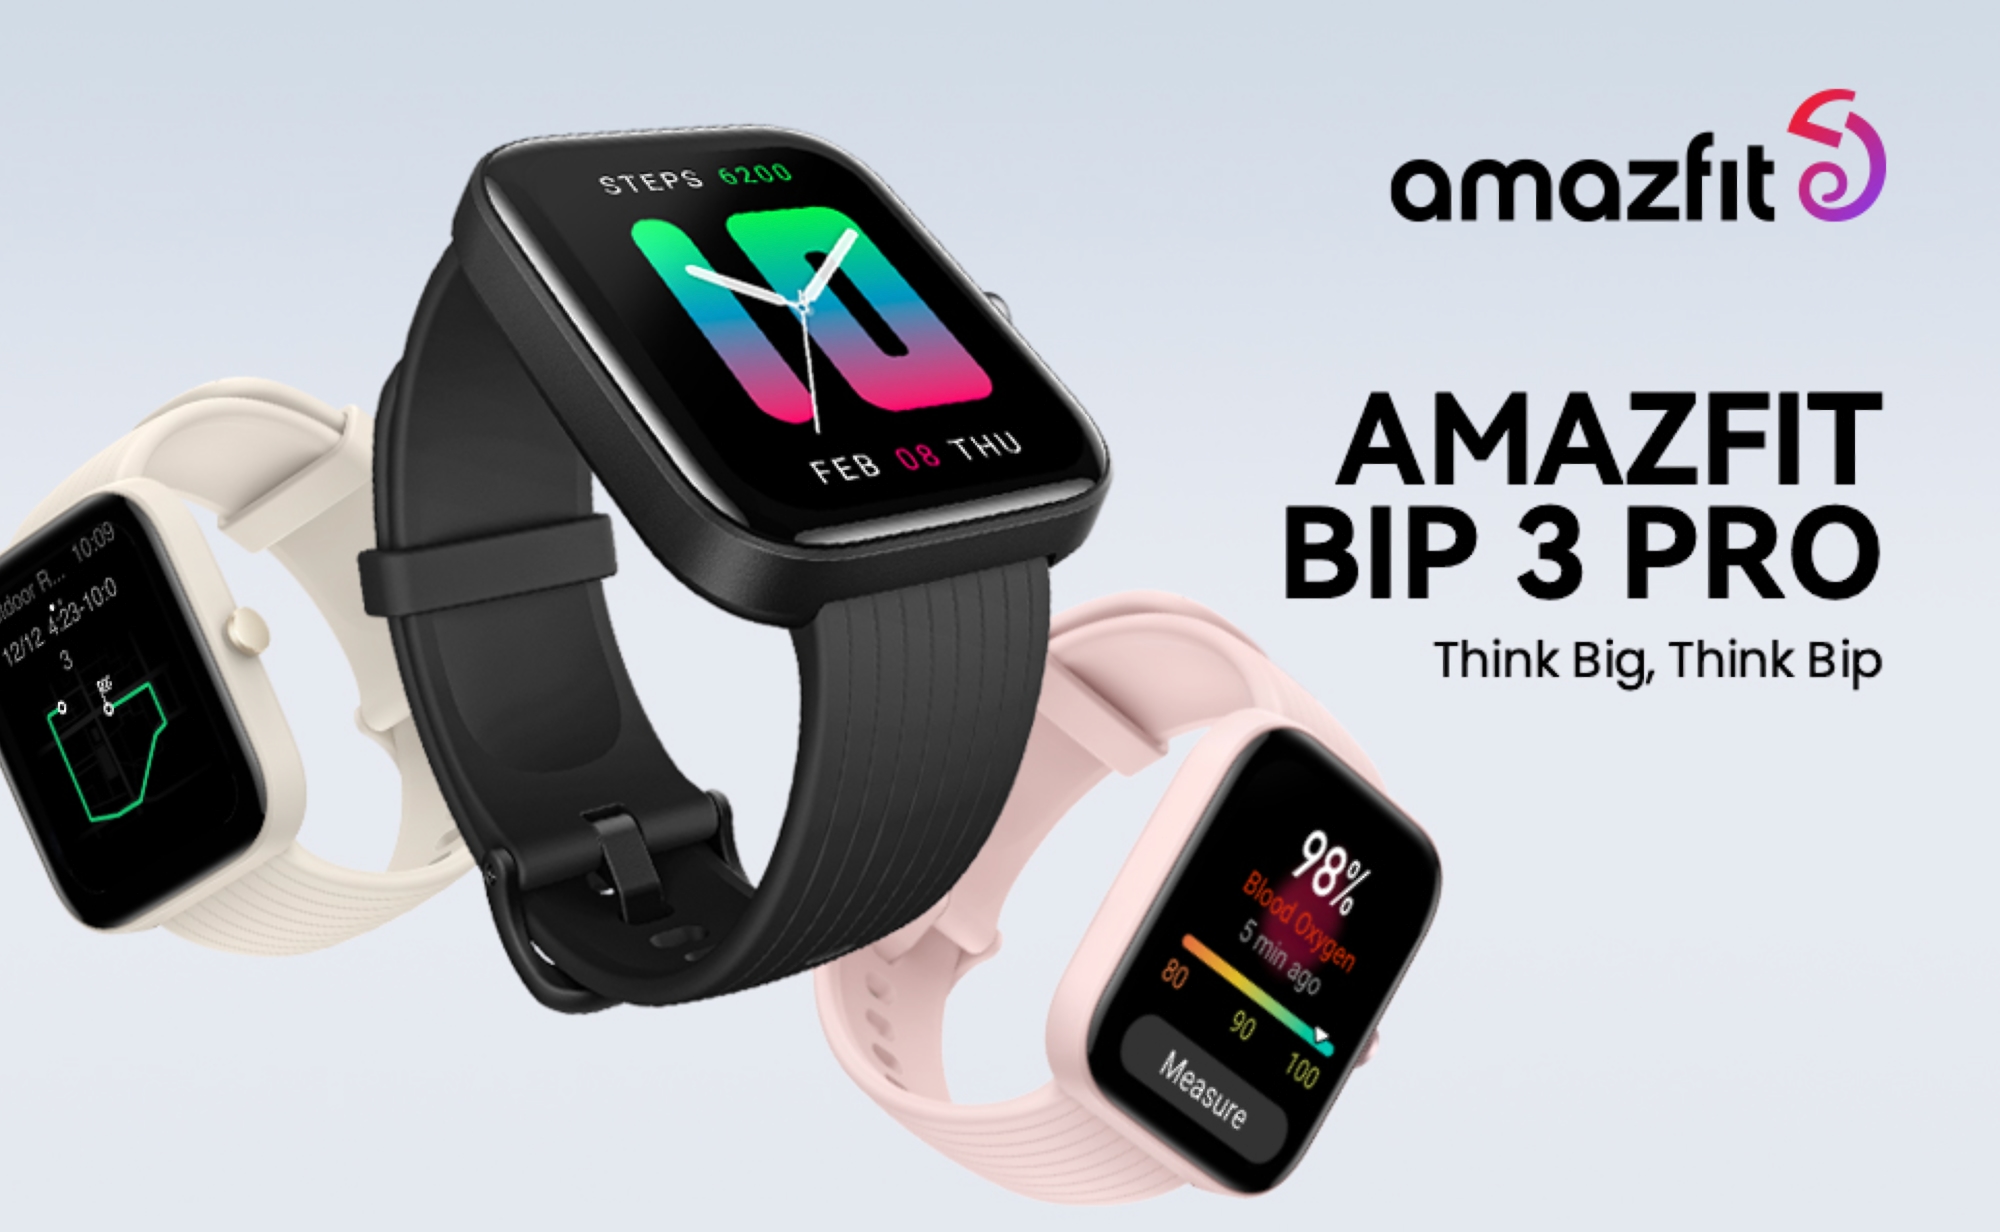 Amazfit Bip 3 Pro with four navigation systems, Alexa support, and up to 14  days of battery life is on sale on  with a $15 discount